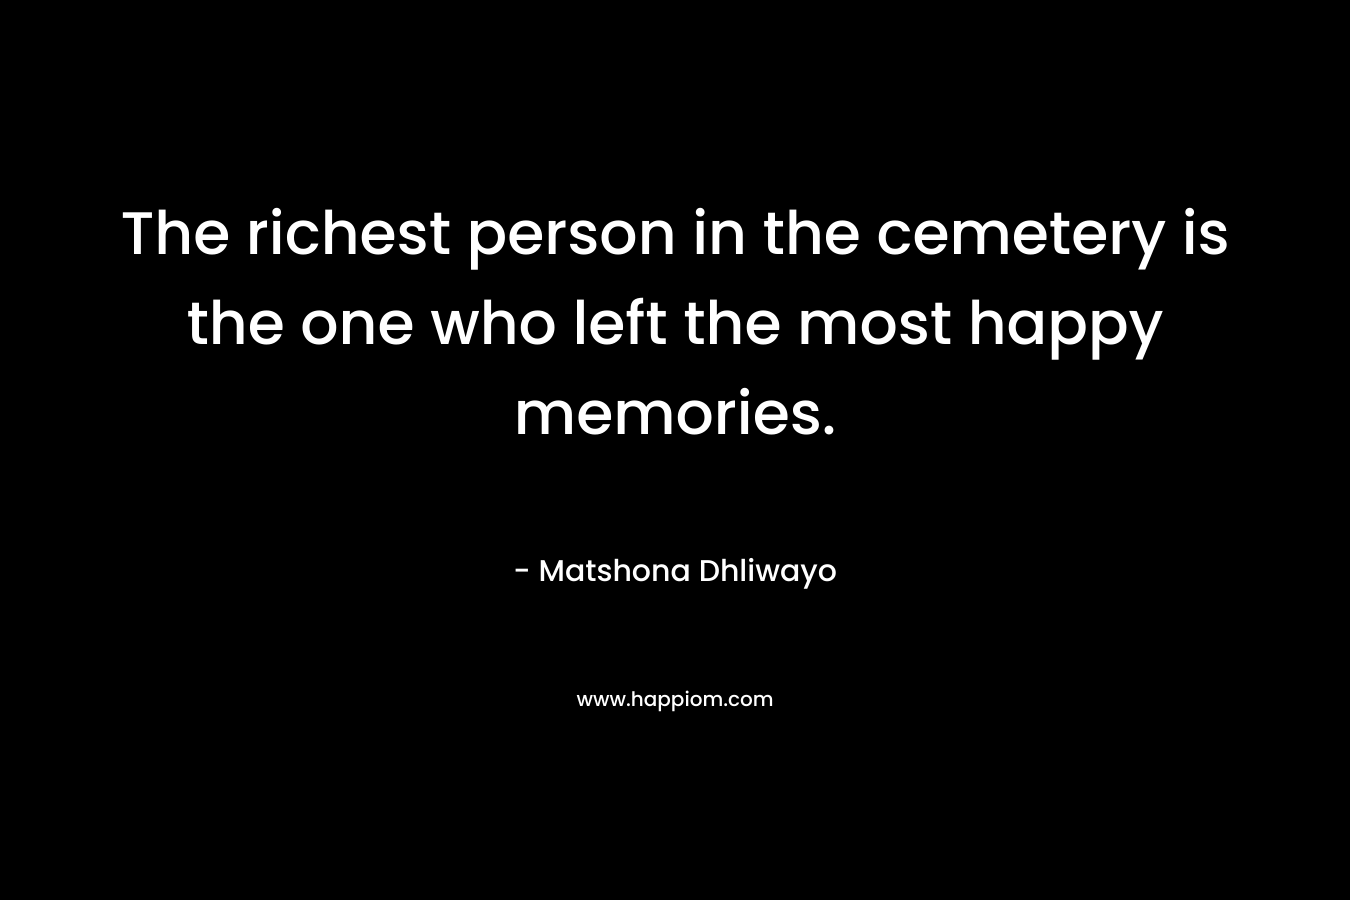 The richest person in the cemetery is the one who left the most happy memories.